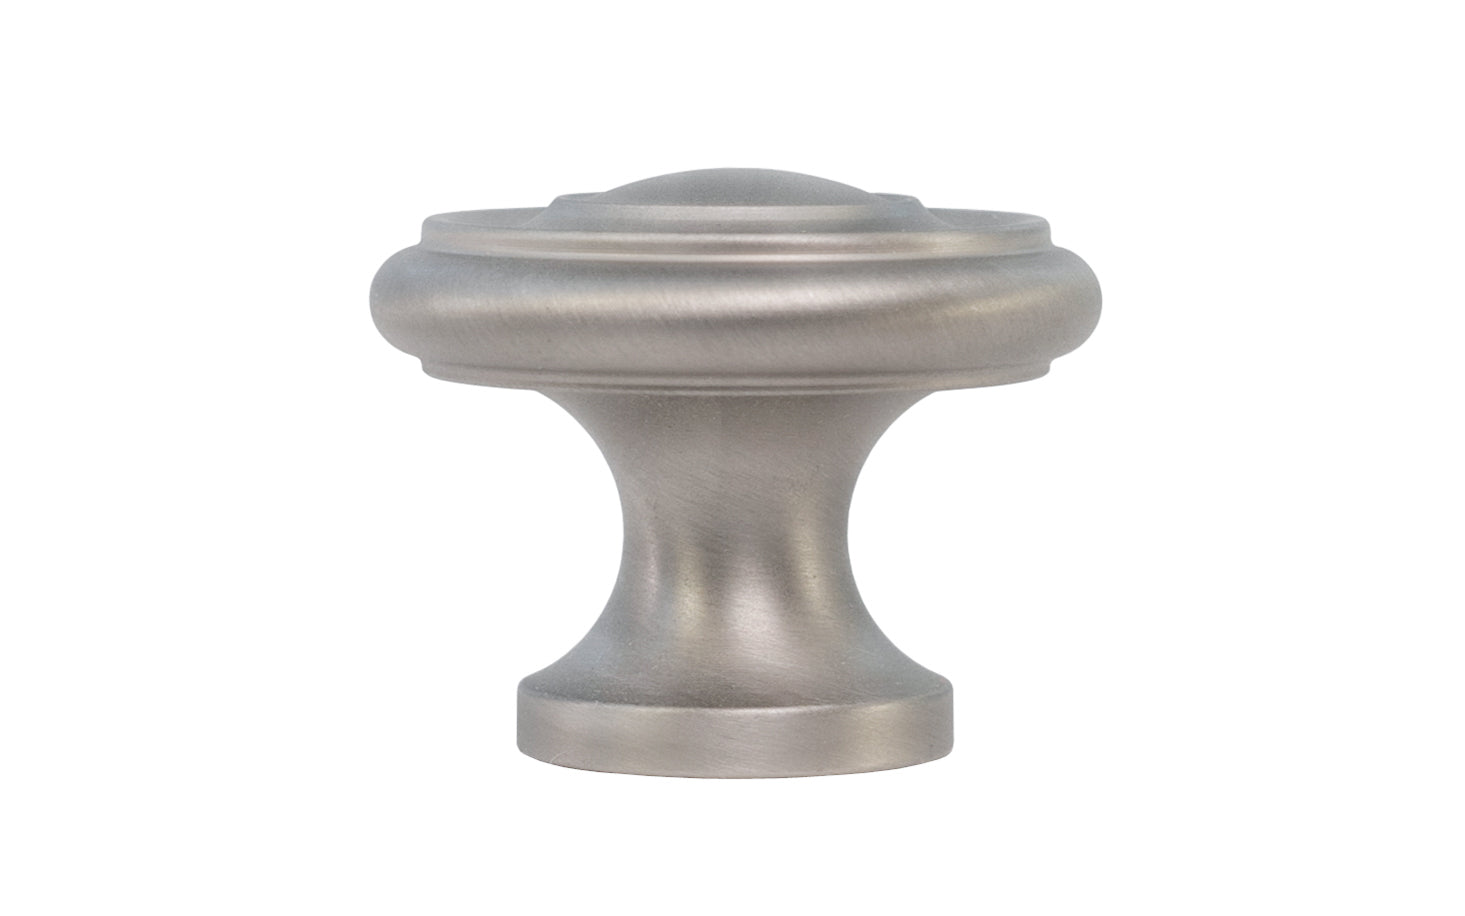 Vintage-style Hardware · Solid Brass classic contemporary / art deco, mid-century style cabinet knob. High quality solid brass 1-1/4" diameter Knob. Ideal for kitchen & bathroom cabinets, & furniture. Brushed Nickel Finish.